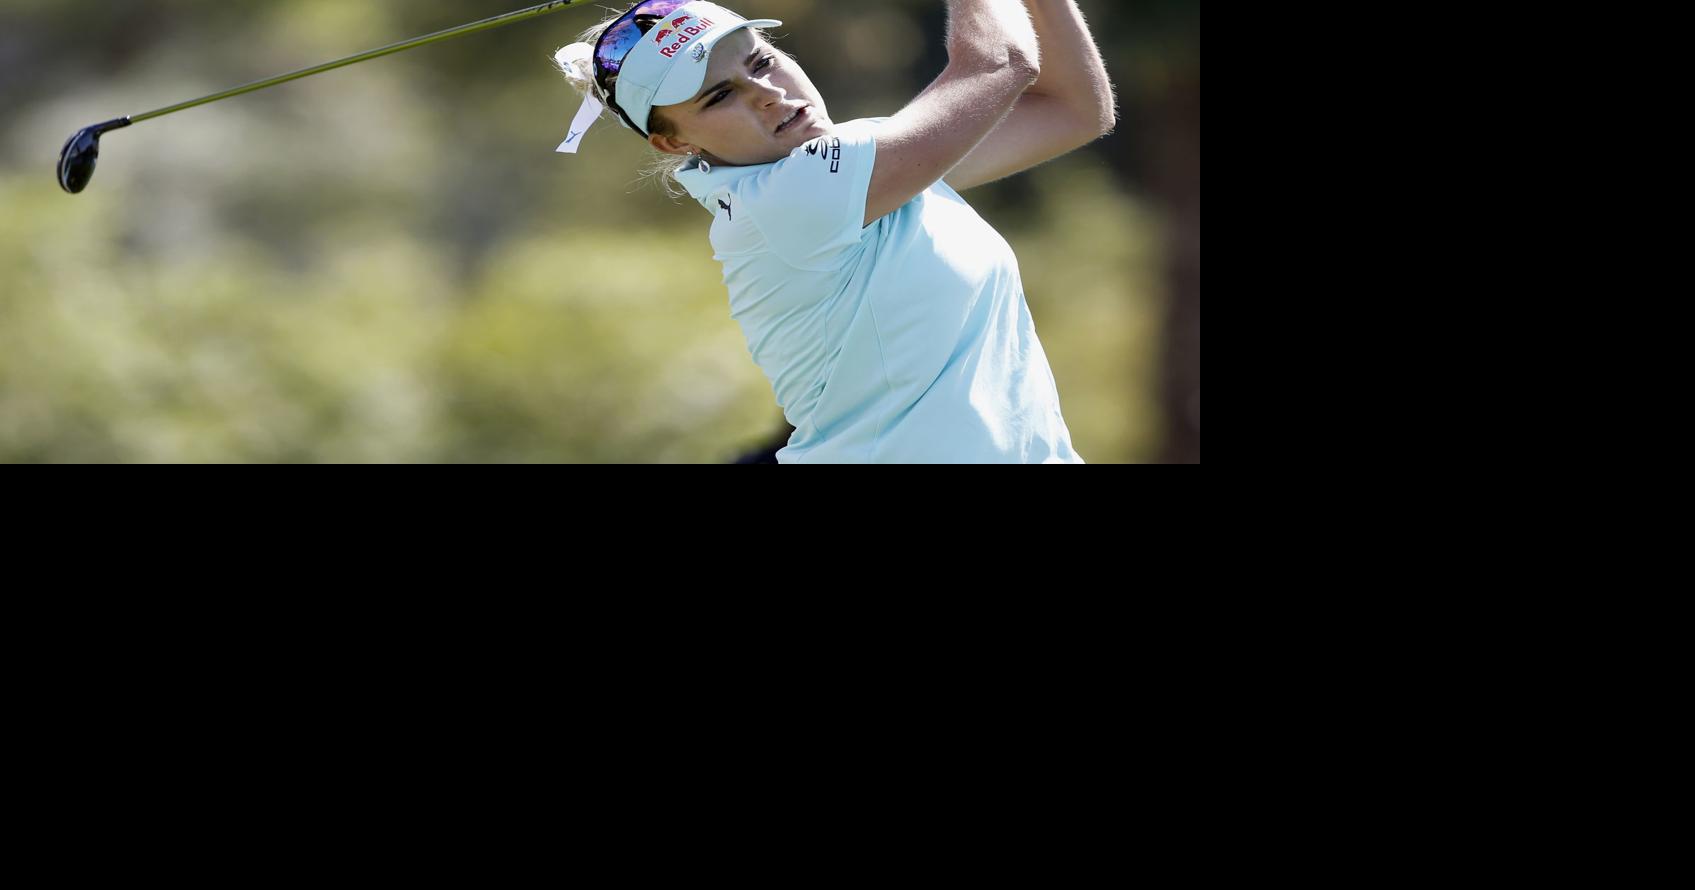 Zurich notebook: Lexi Thompson declines comment on golf ruling from her ...